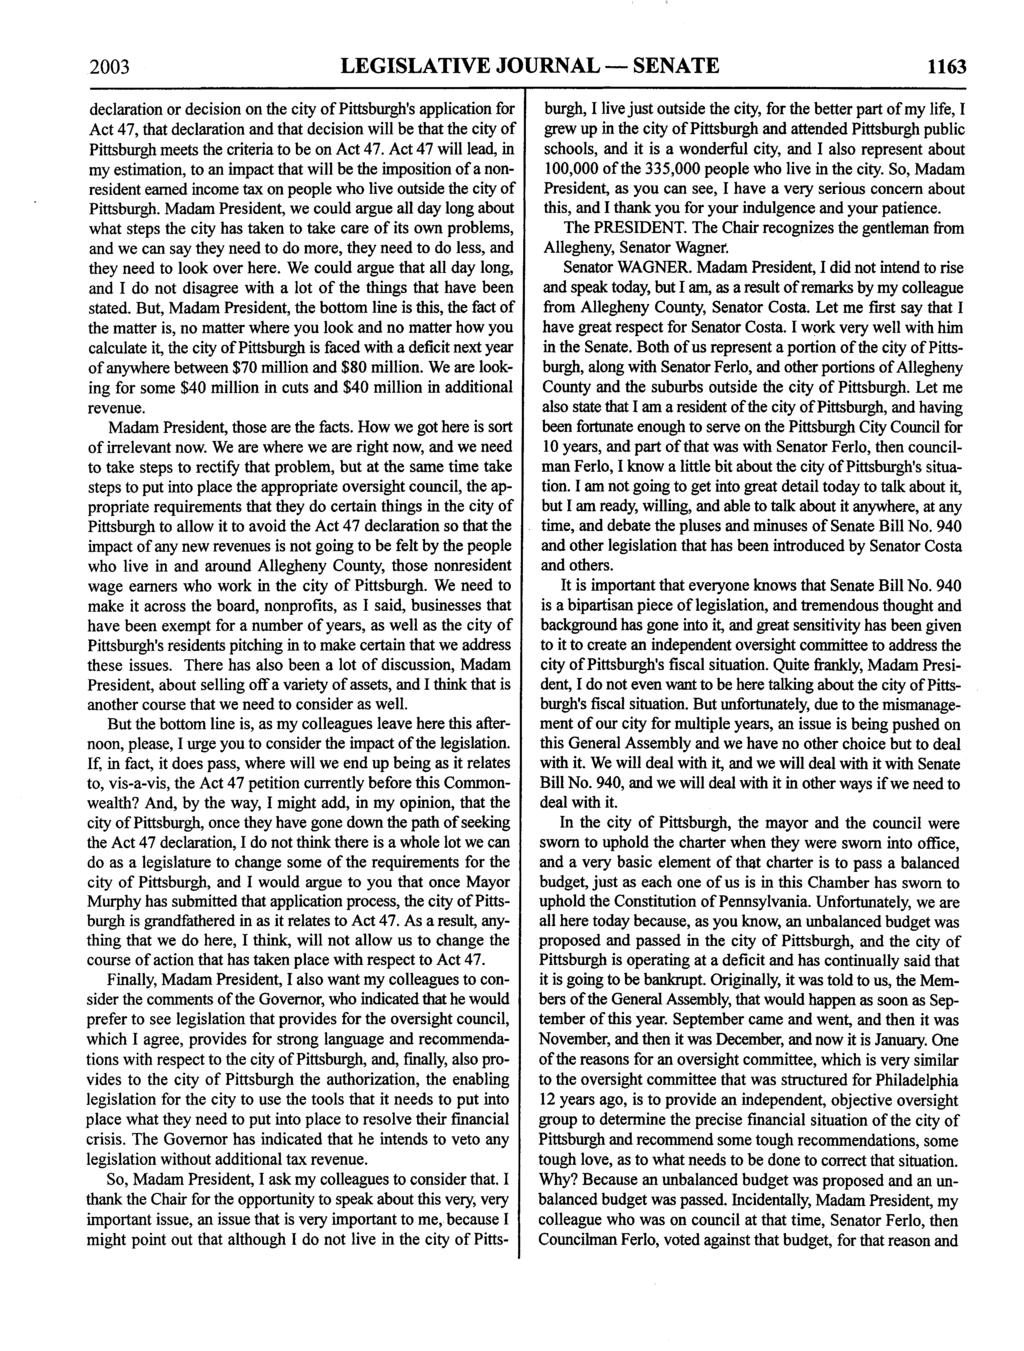 2003 LEGISLATIVE JOURNAL SENATE 1163 declaration or decision on the city of Pittsburgh's application for Act 47, that declaration and that decision will be that the city of Pittsburgh meets the